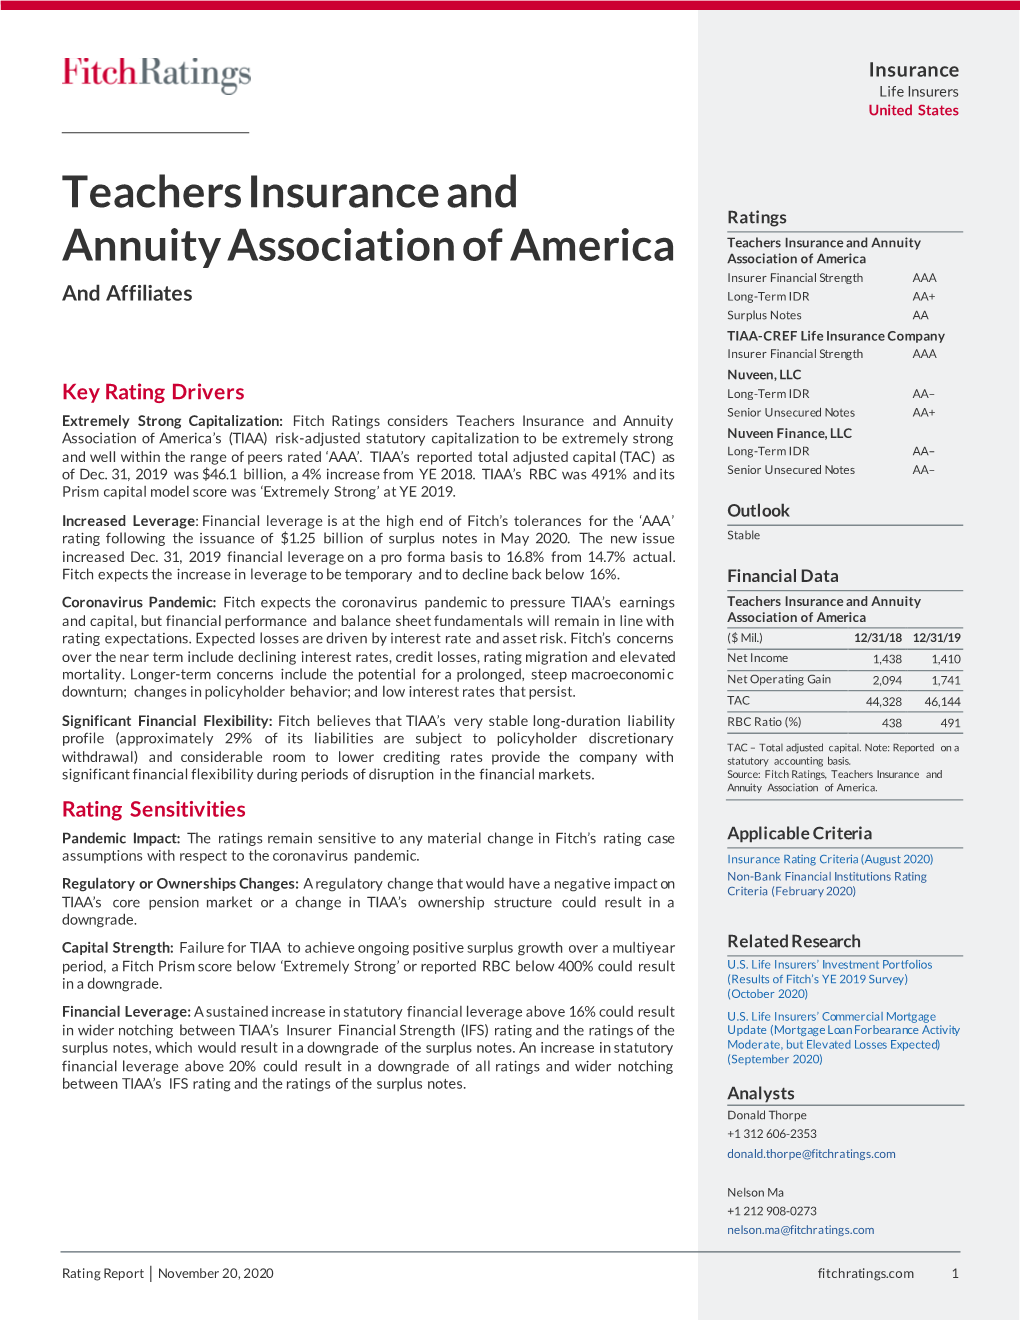 Teachers Insurance and Annuity Association of America